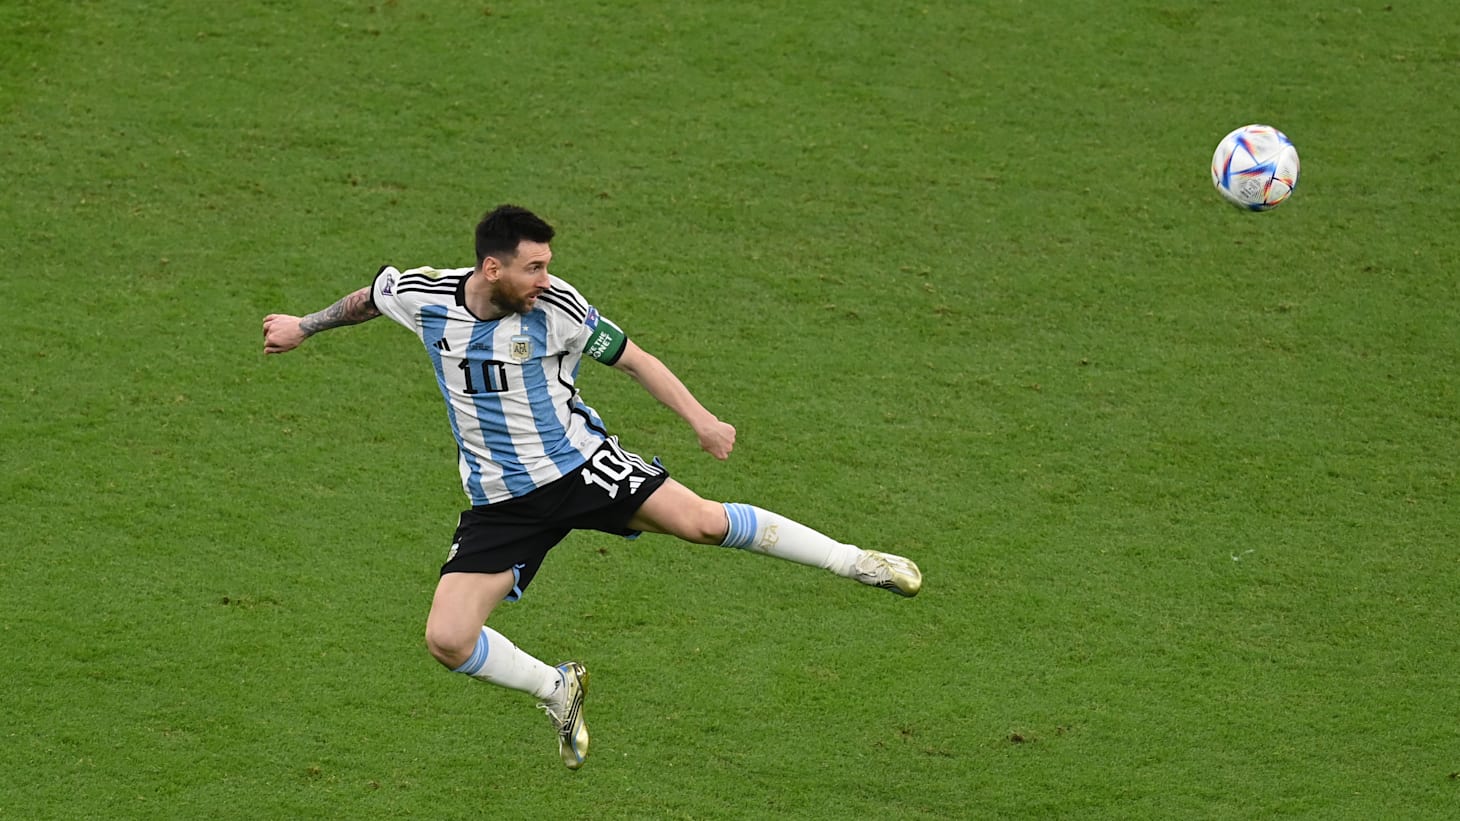 FIFA World Cup 2022 final Argentina vs France match time, schedule and where to watch live streaming and telecast in India